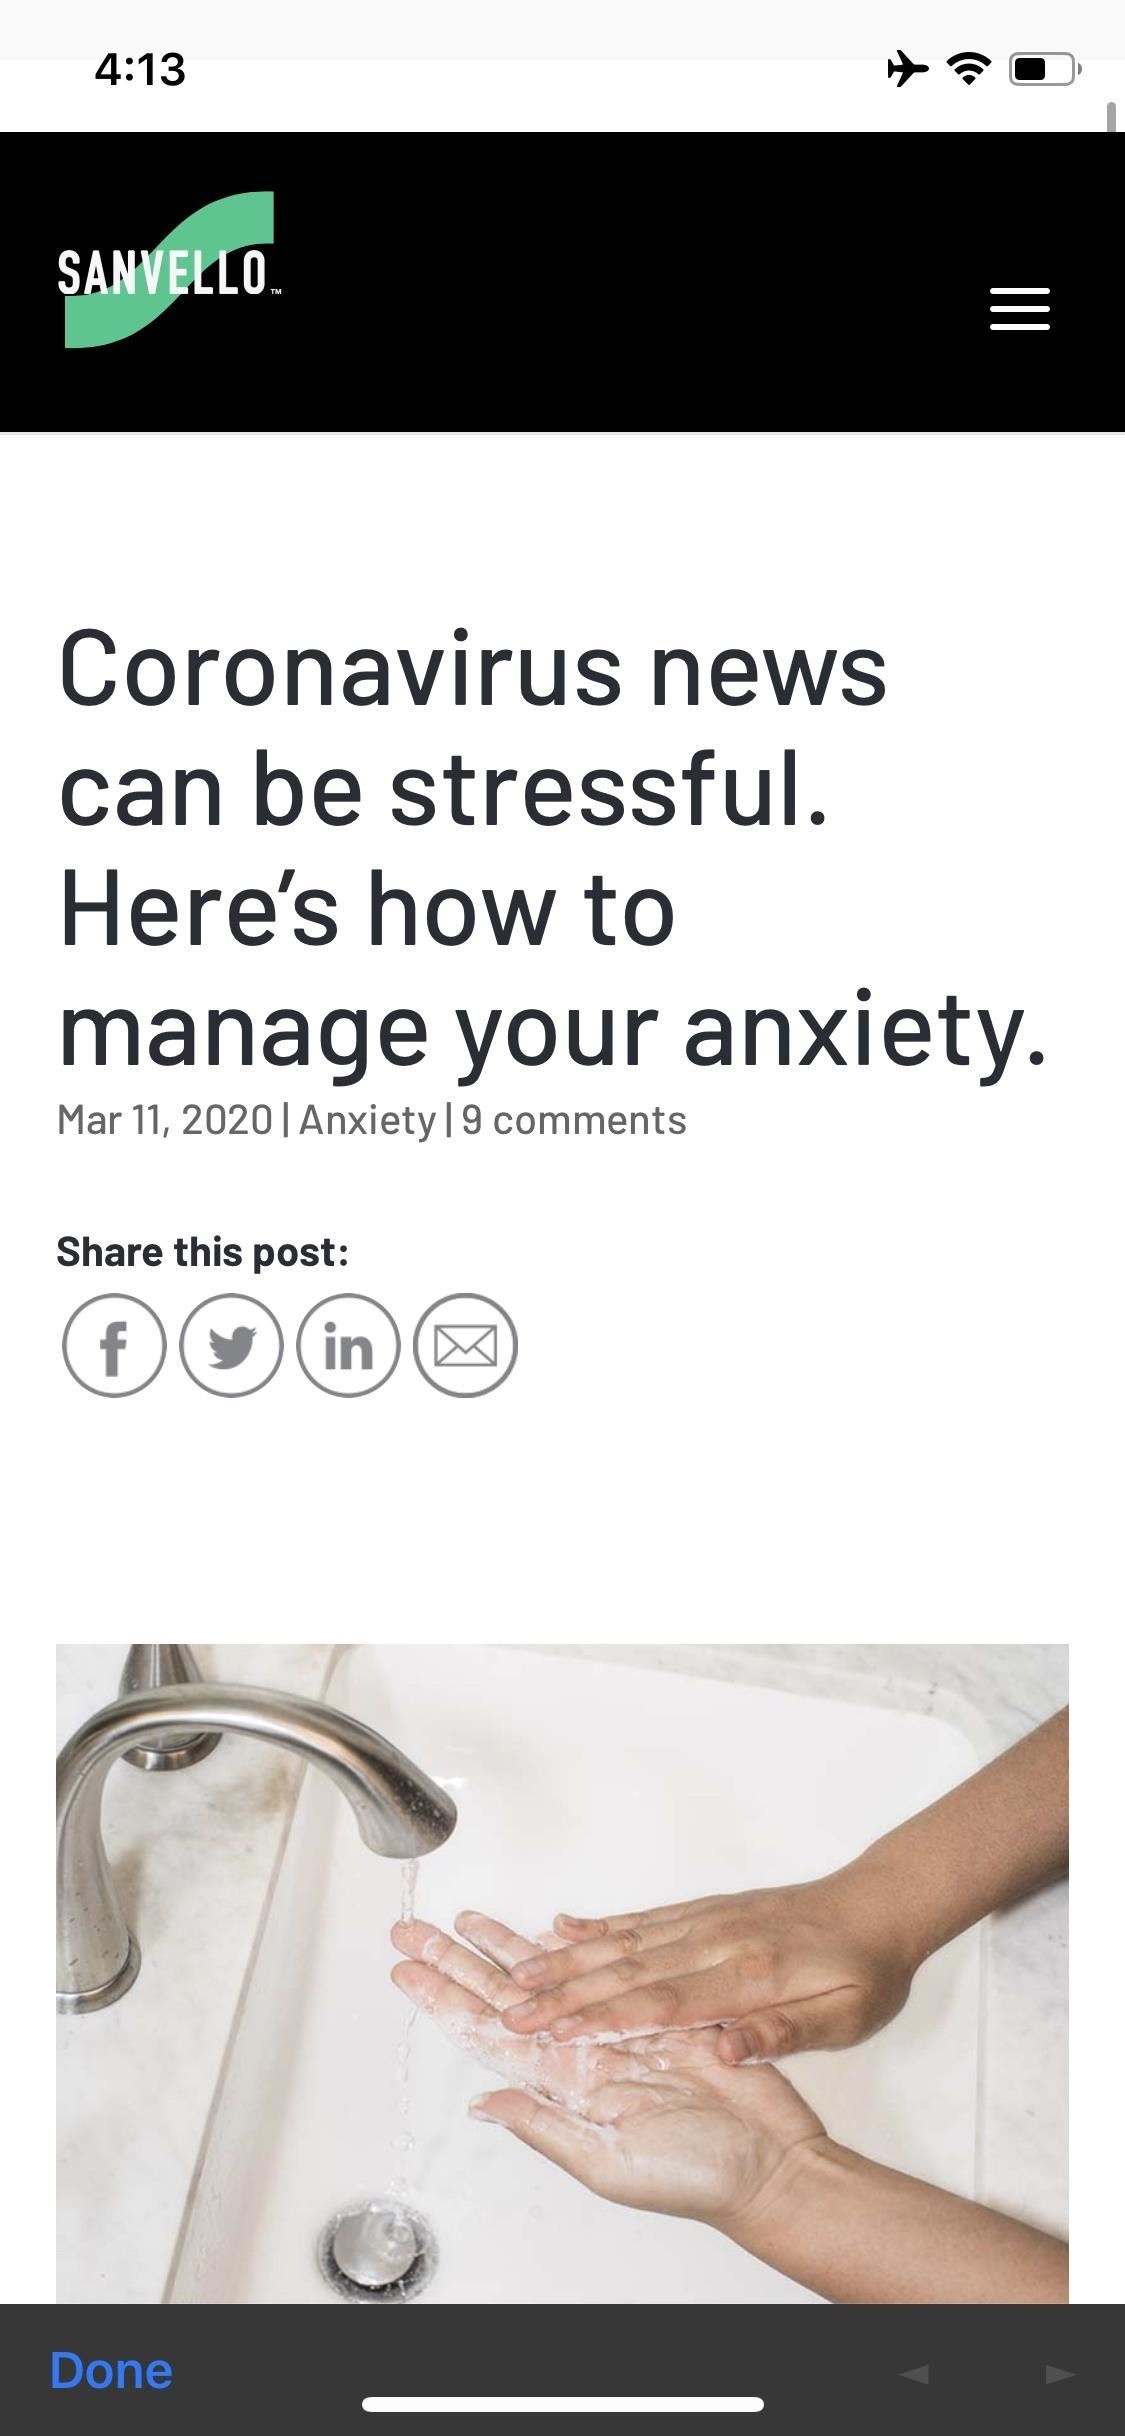 Apps That'll Help You Manage Stress & Anxiety During the Coronavirus Pandemic